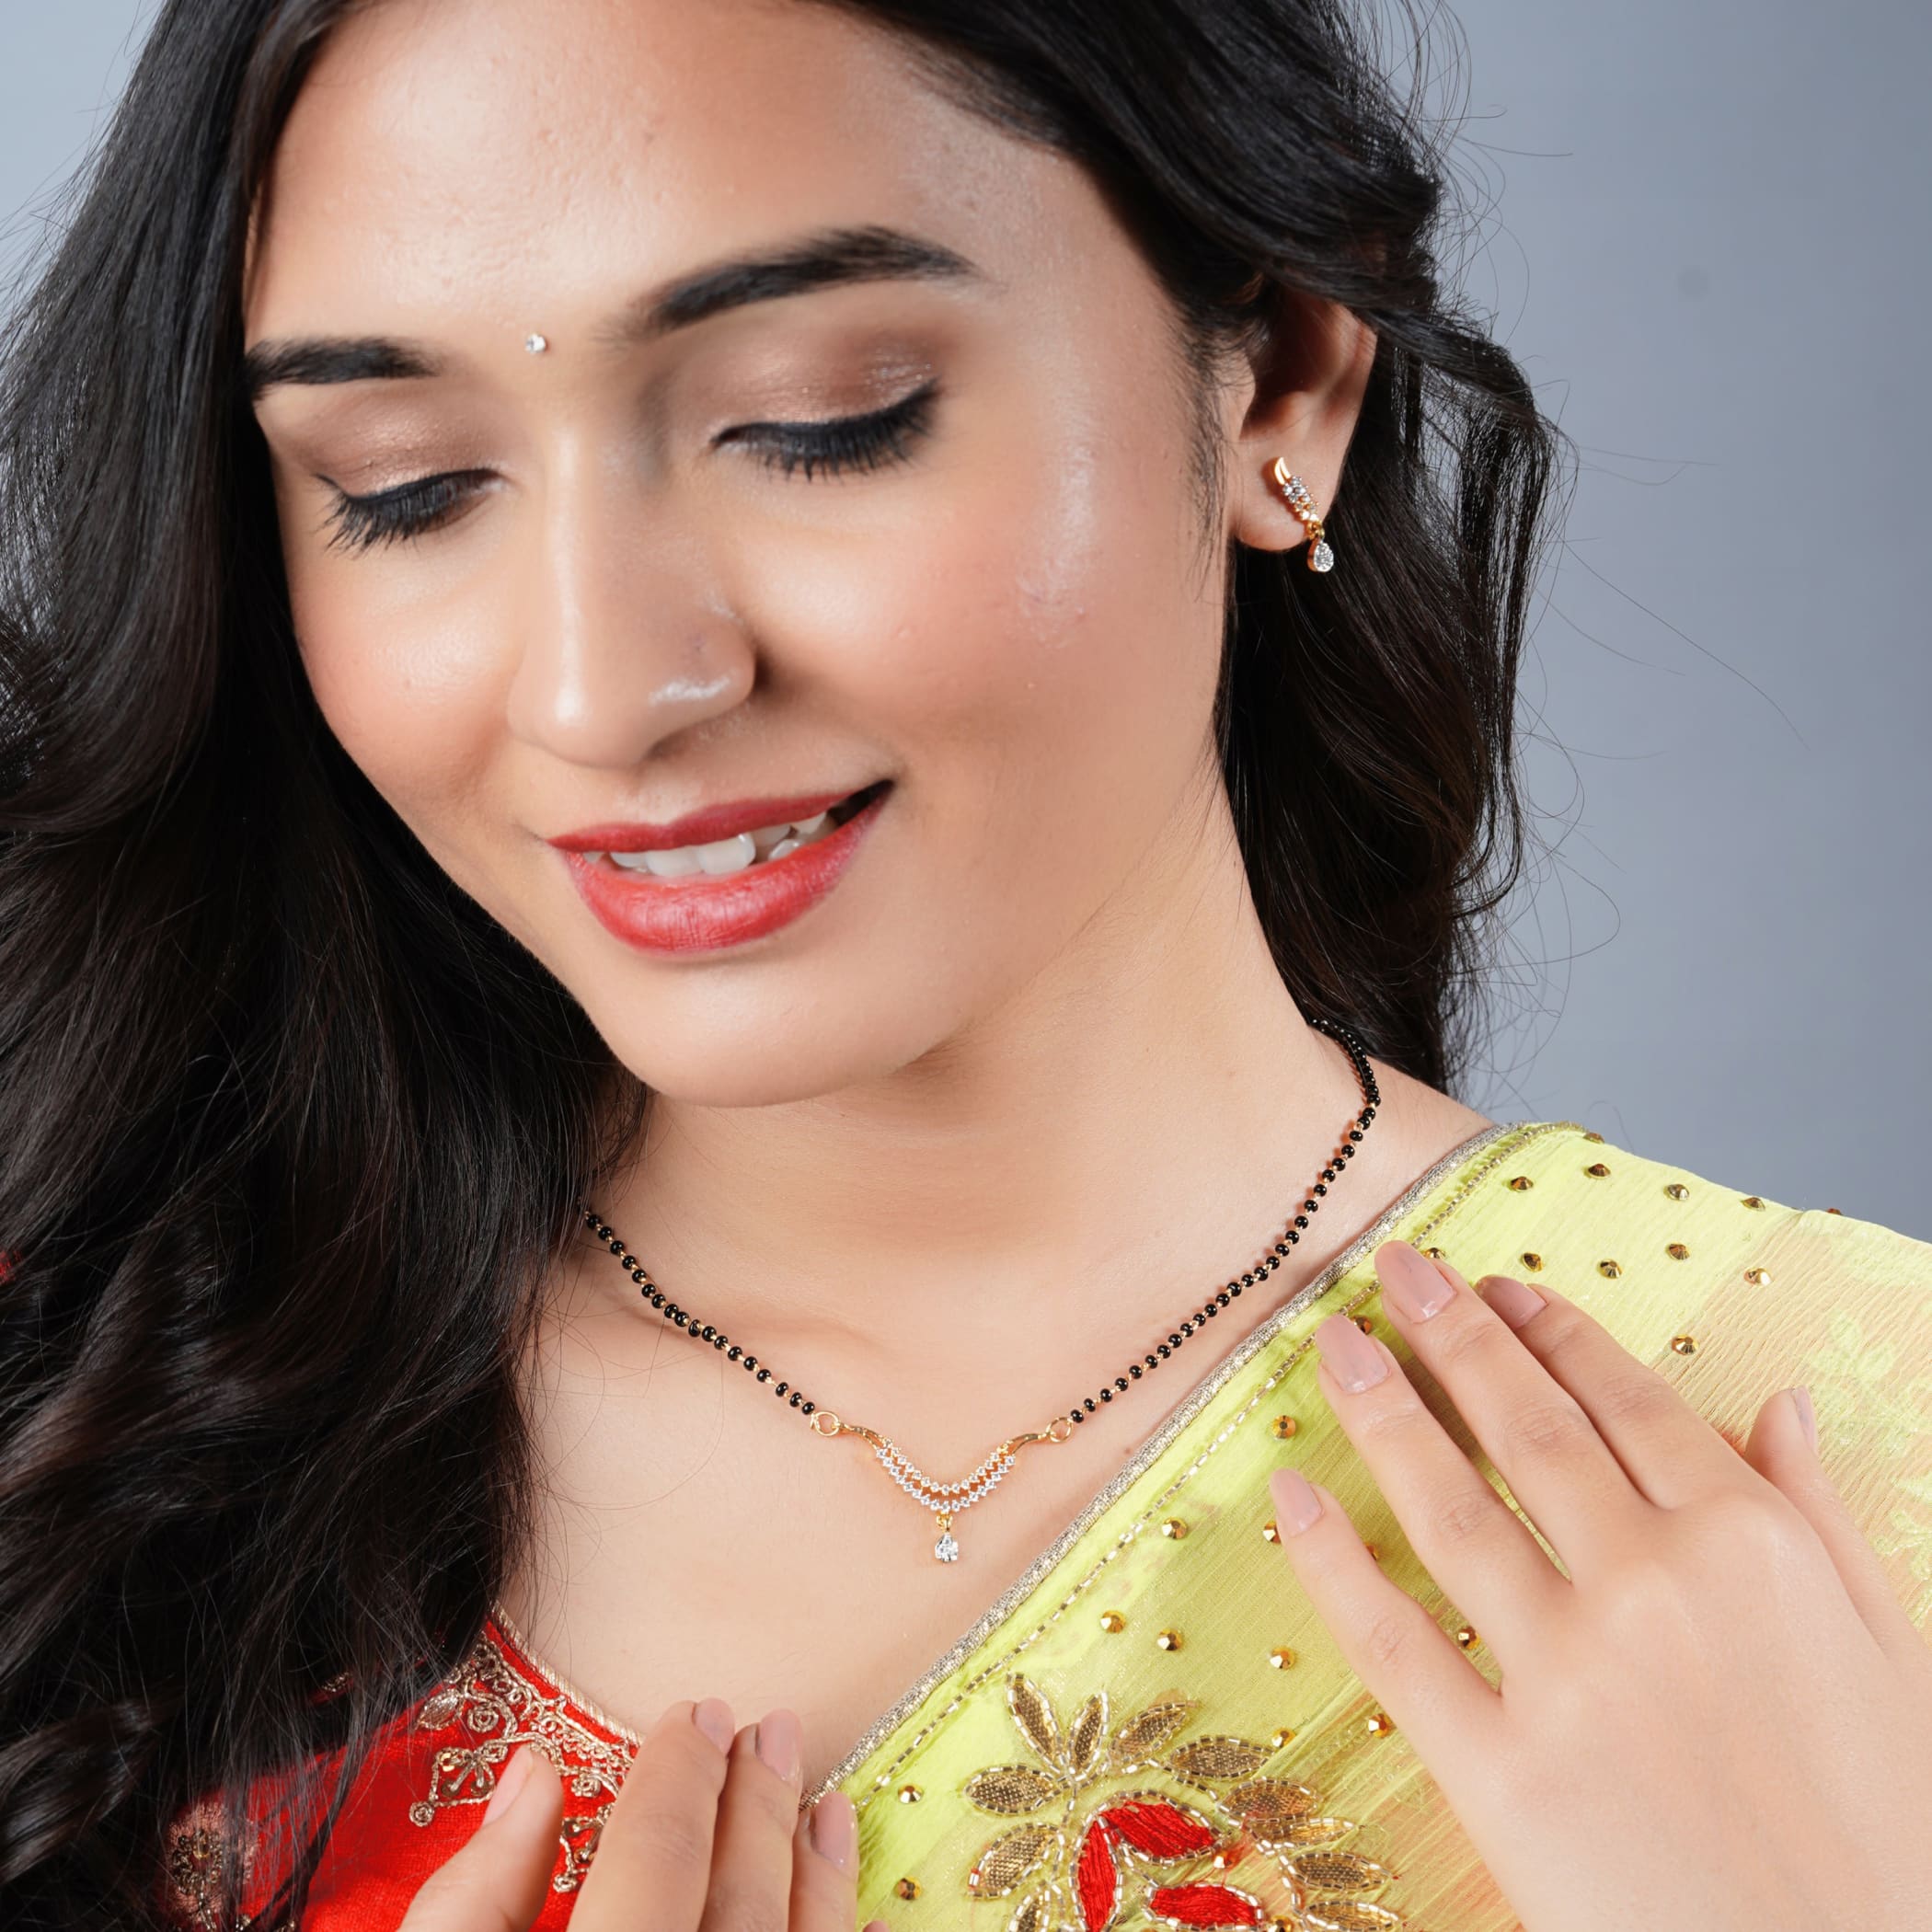 Mangalsutra with earring jewerly set necklace chain earrings